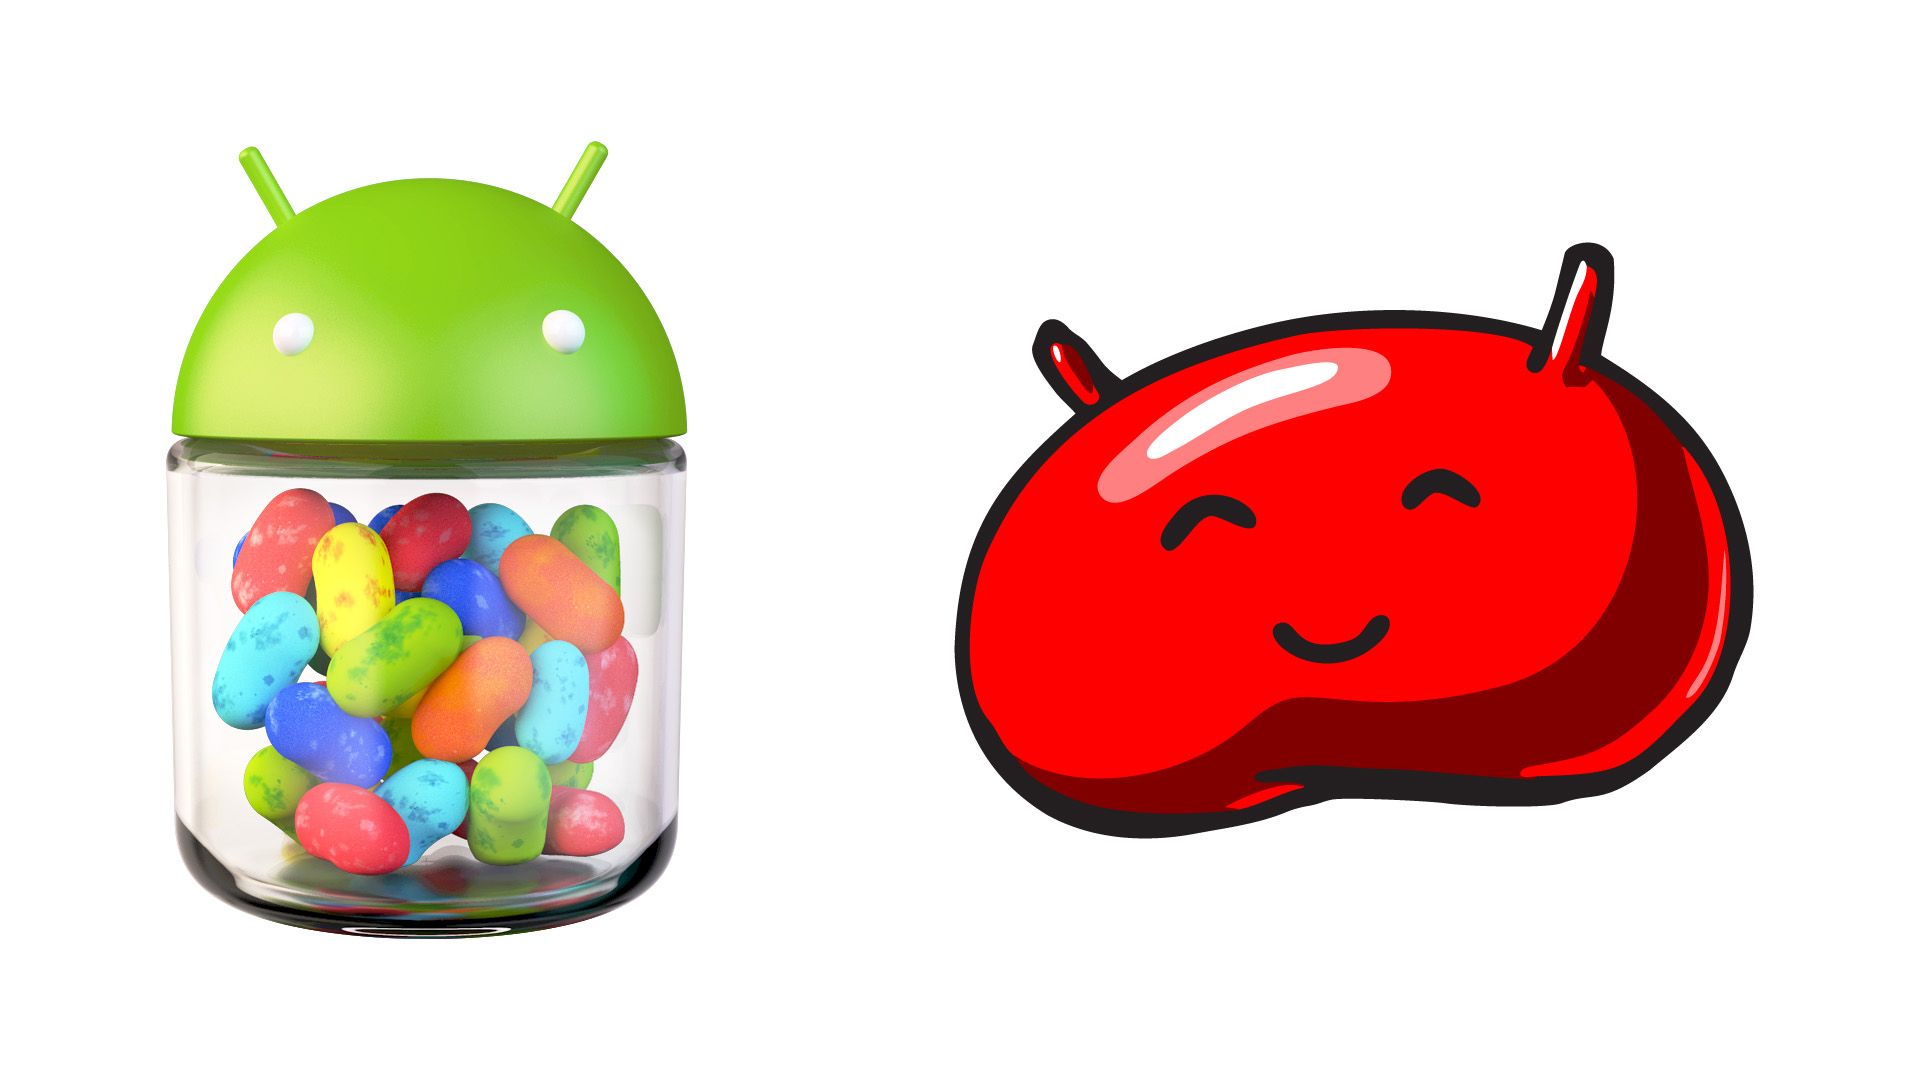 Ícones do Android 4.1 Jelly Bean